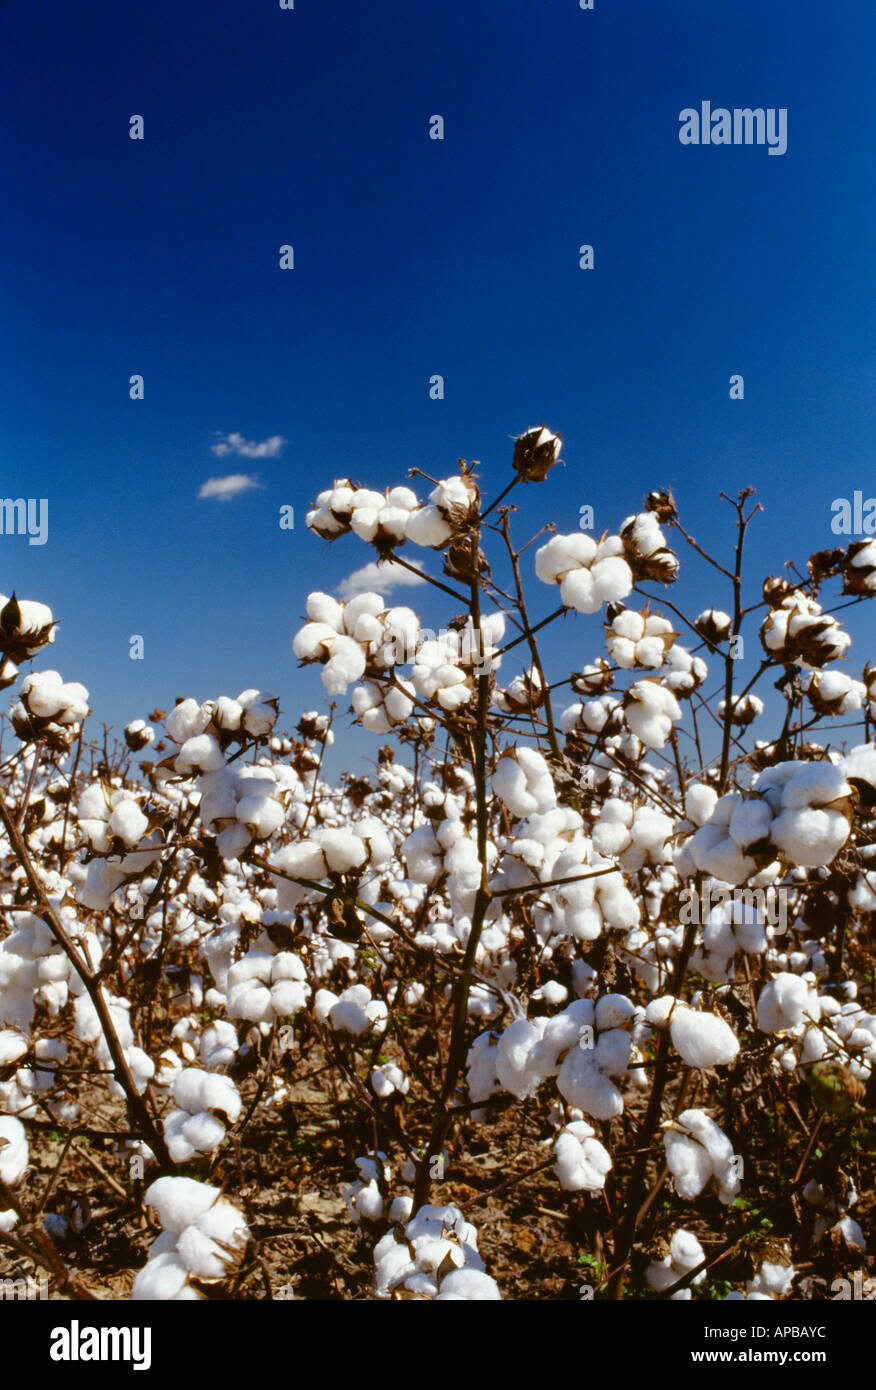 Agriculture - Closeup of mature harvest ready cotton with fully open bolls / Mississippi, USA. Stock Photo